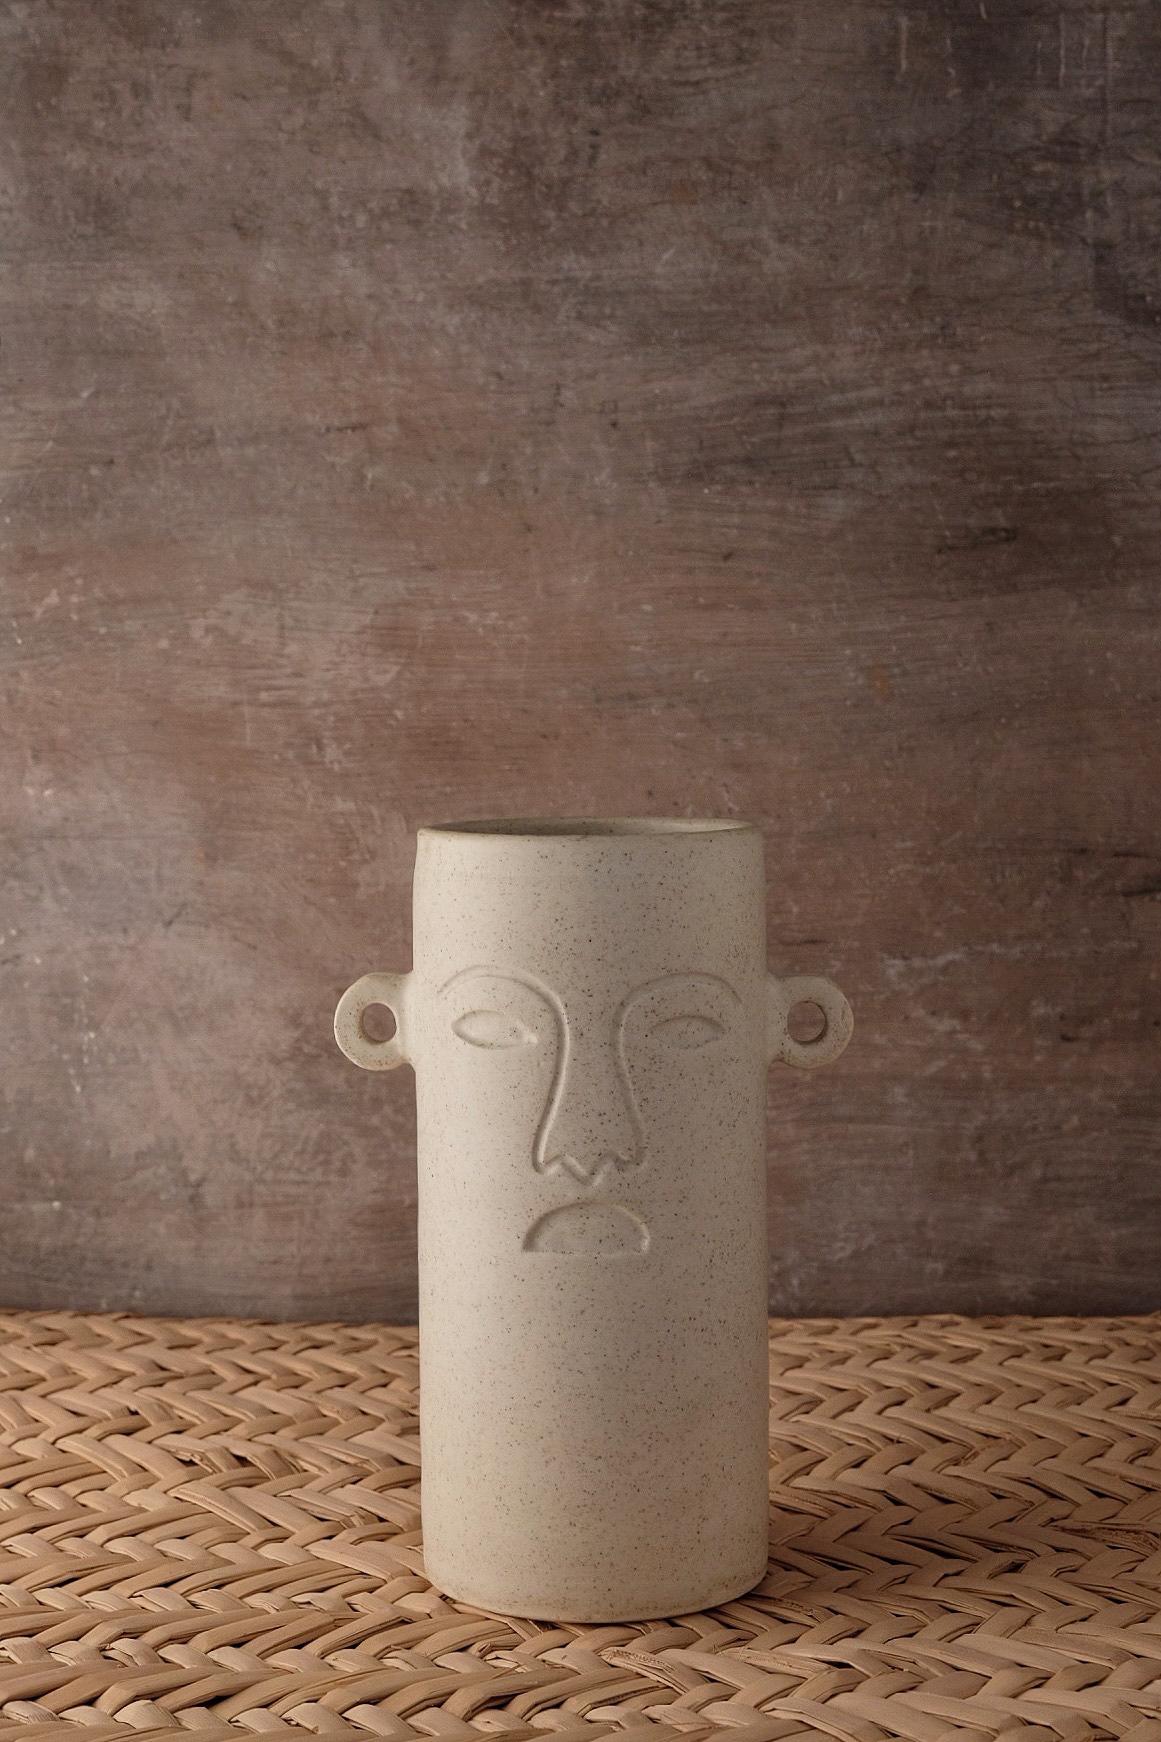 Xochipilli vase by Onora
Dimensions: D 12 x 25 cm
Materials: Ceramic
Available in black, white and sand.

This ceramic vase refers pre-hispanic ceremonial masks. Molded by artisans from the State of Mexico.

This collection reinterprets one